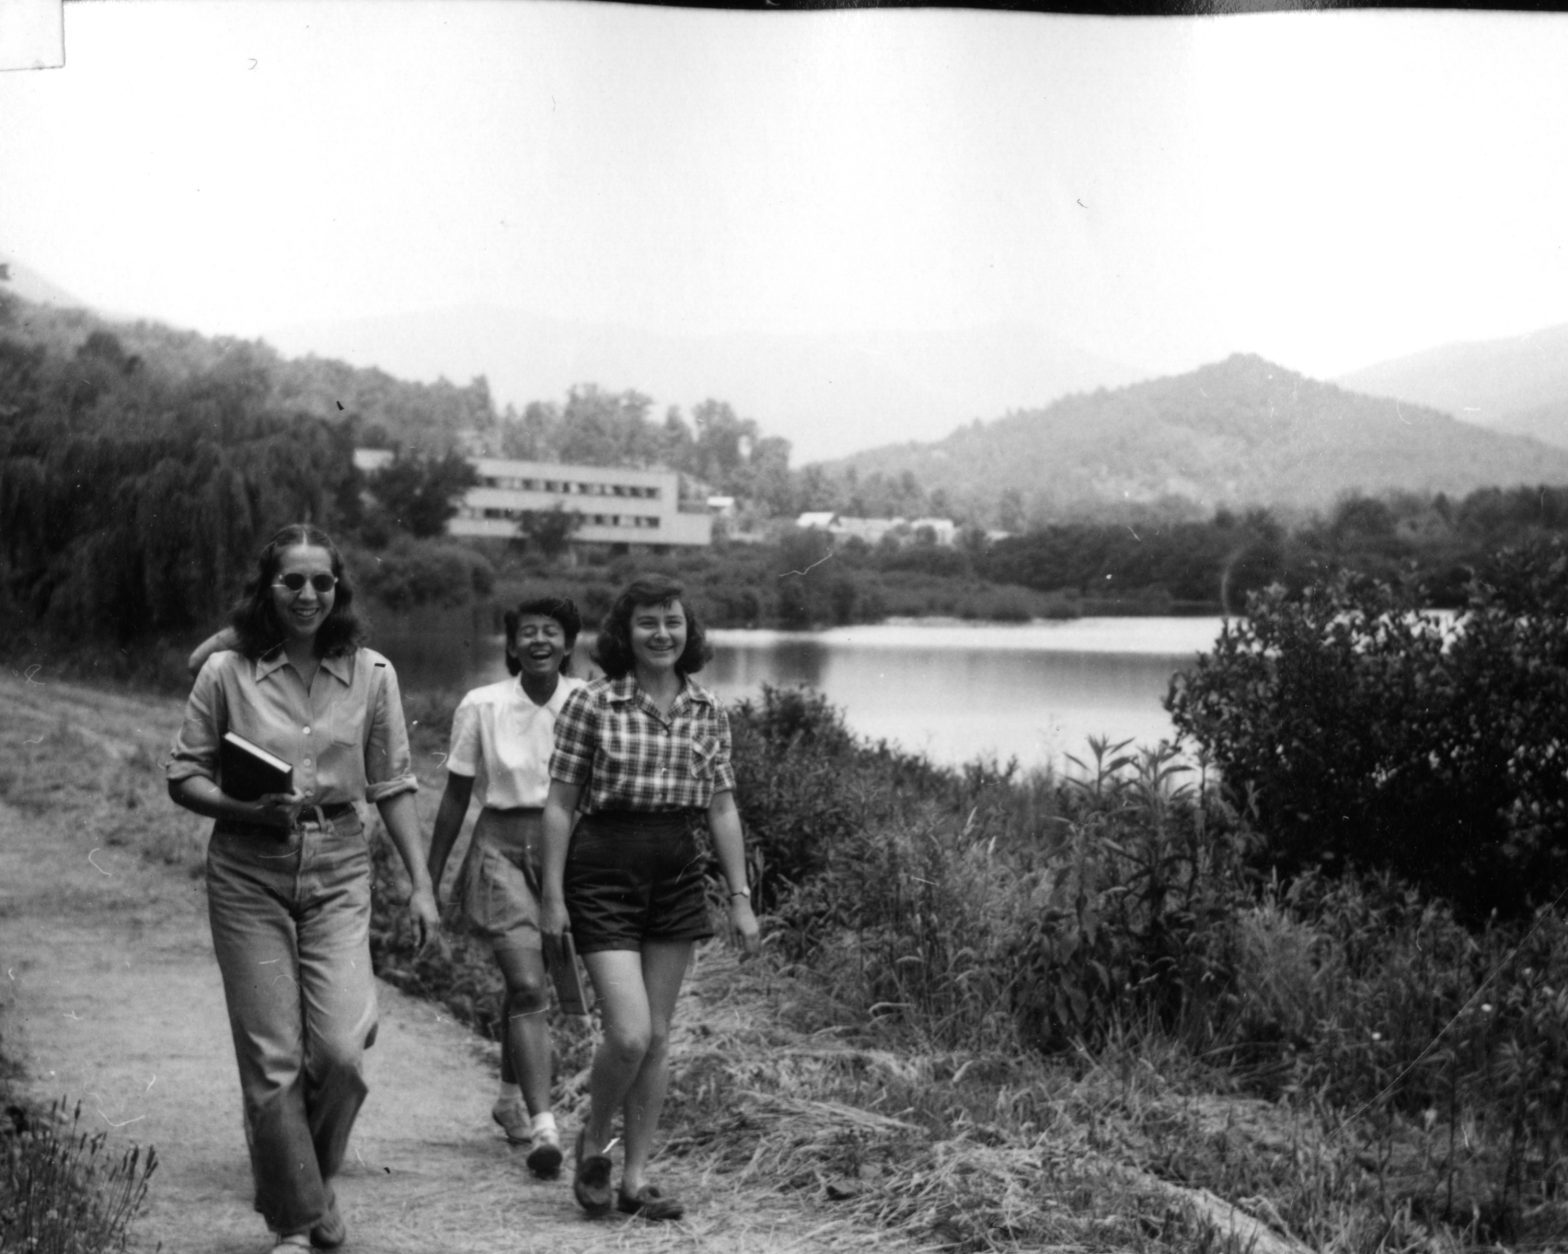 Black and white photo of three laughing young women, walking along a country path next to a large lake, with mountains in the background. There is also a white modernist building in the background.